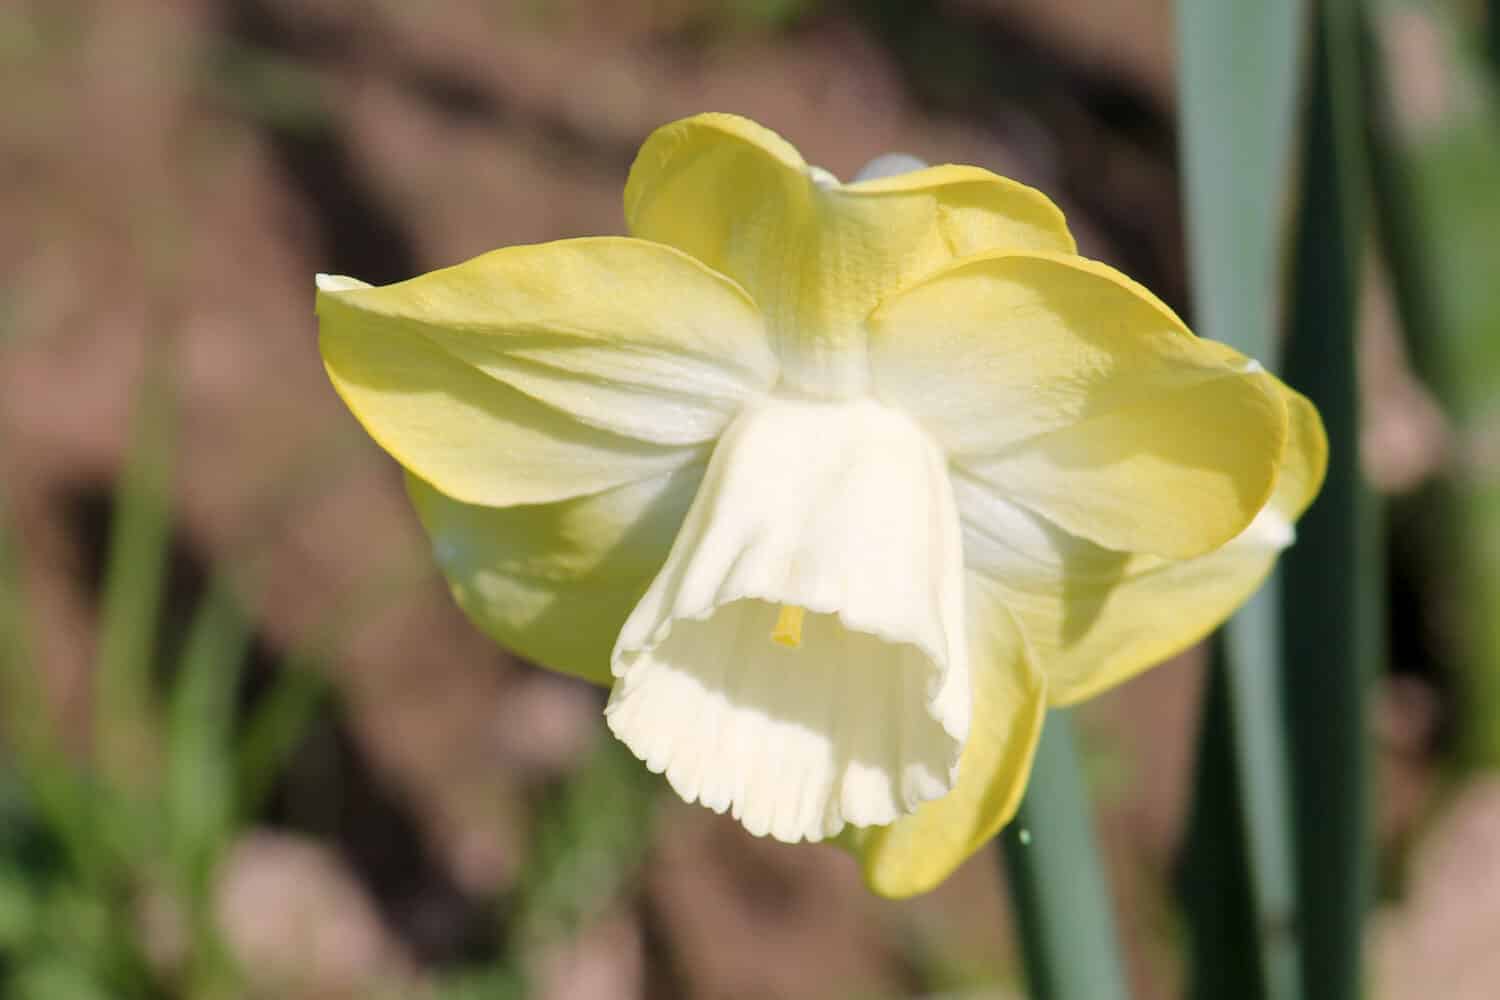 Yellow flower of Daffodil (Narcissus) cultivar Avalon from Large-cupped Group